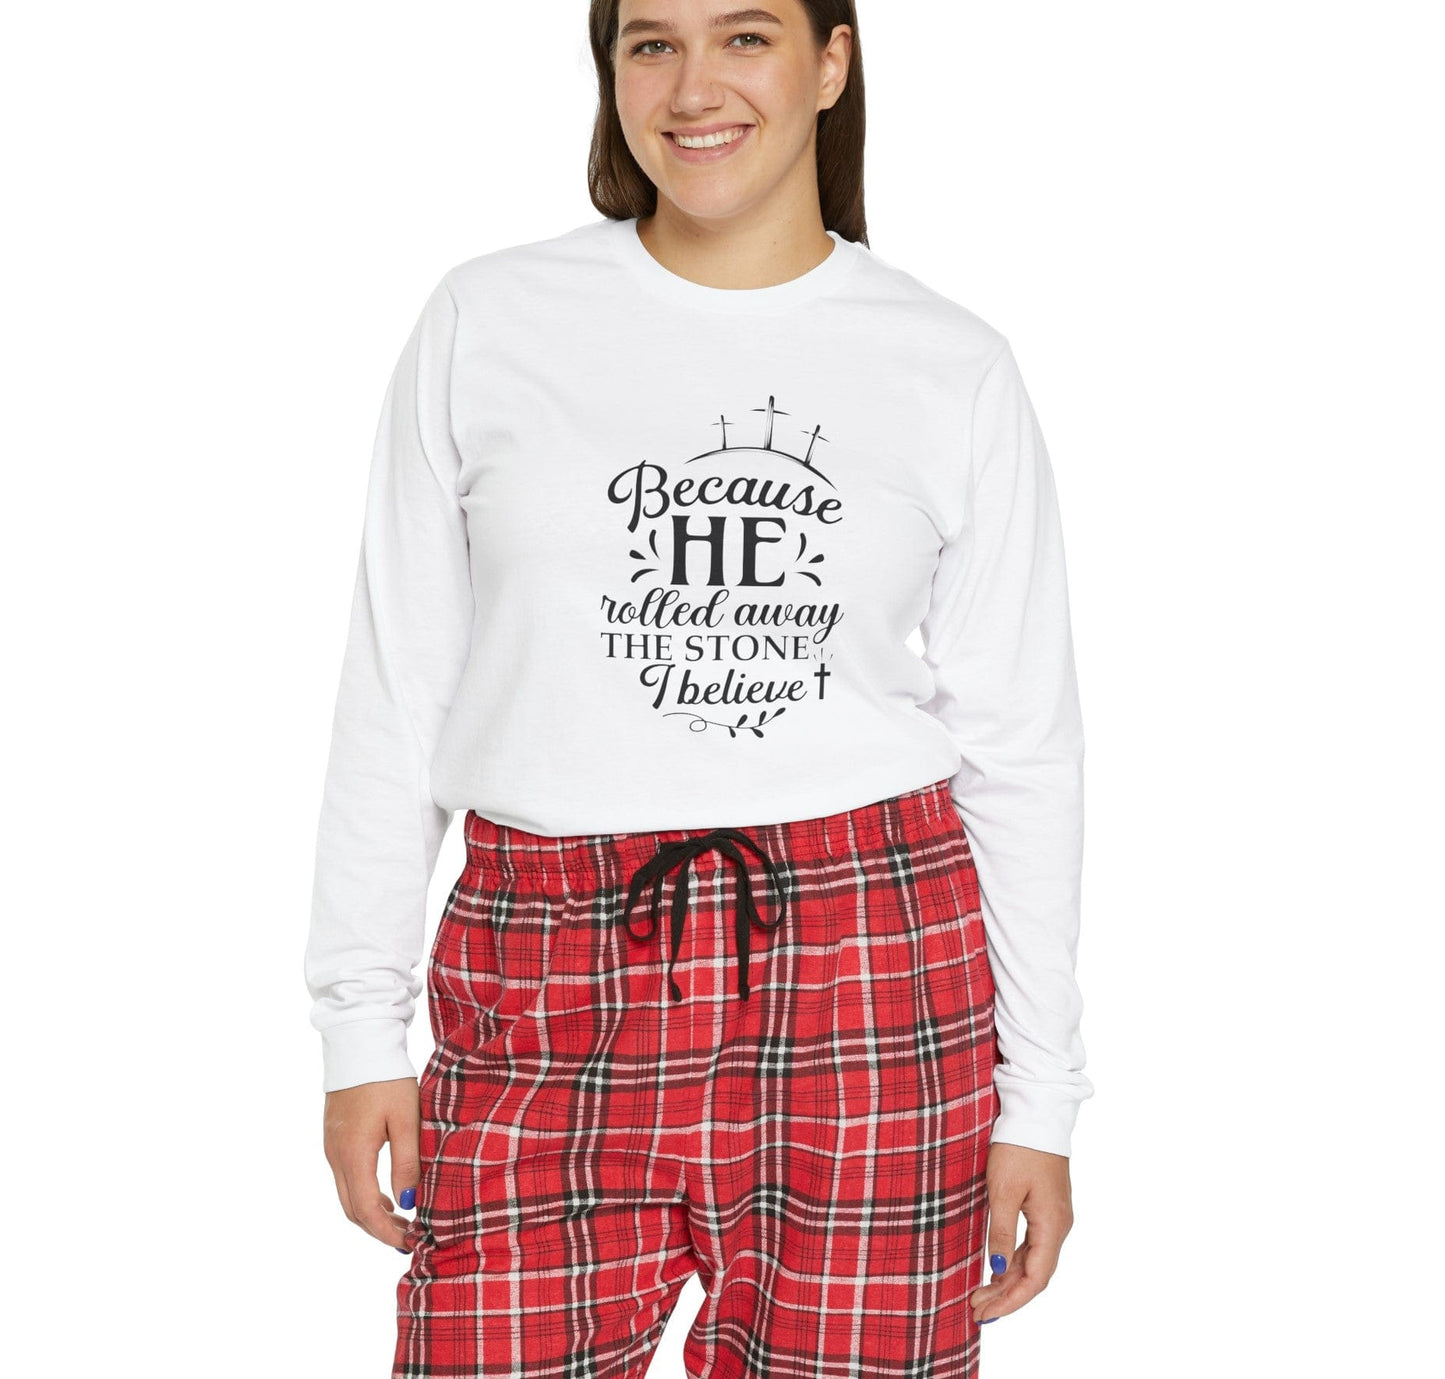 Because He Rolled Away The Stone Women's Long Sleeve Pajama Set